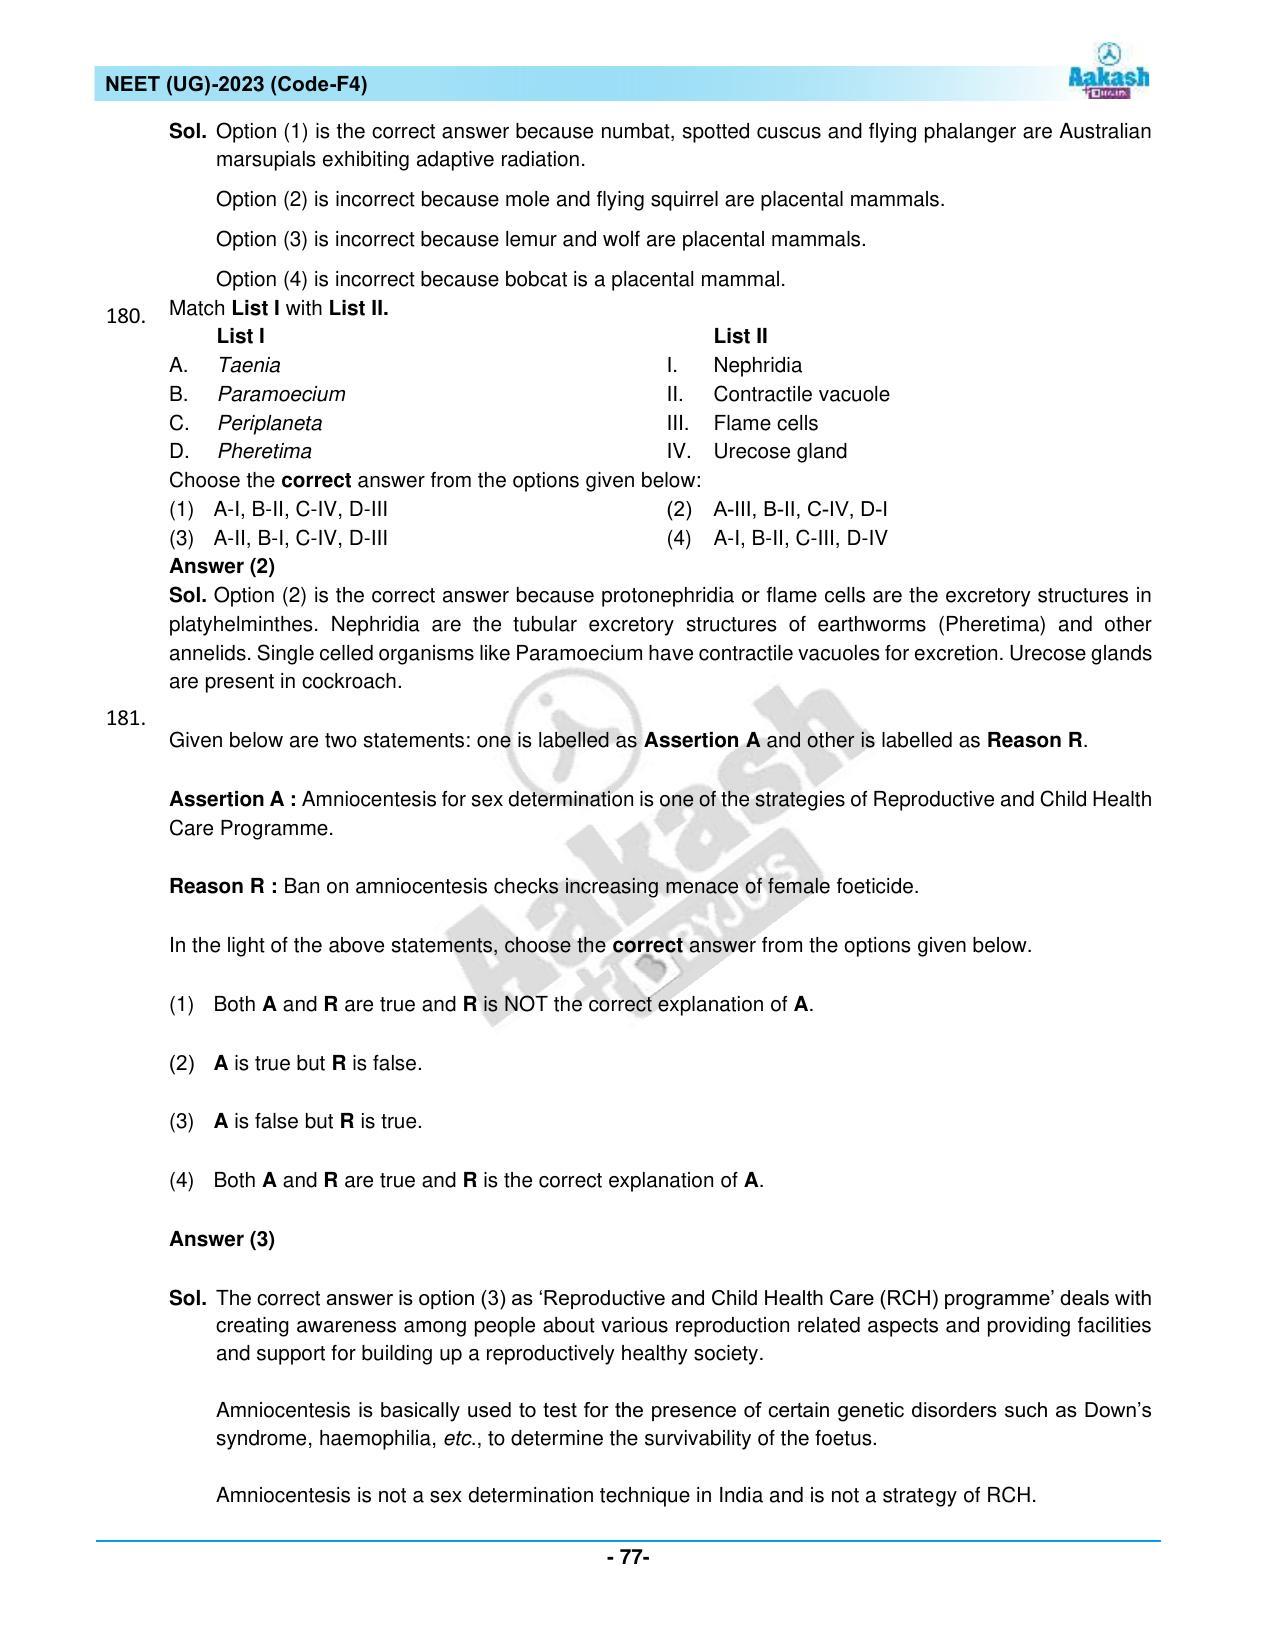 NEET 2023 Question Paper F4 - Page 77